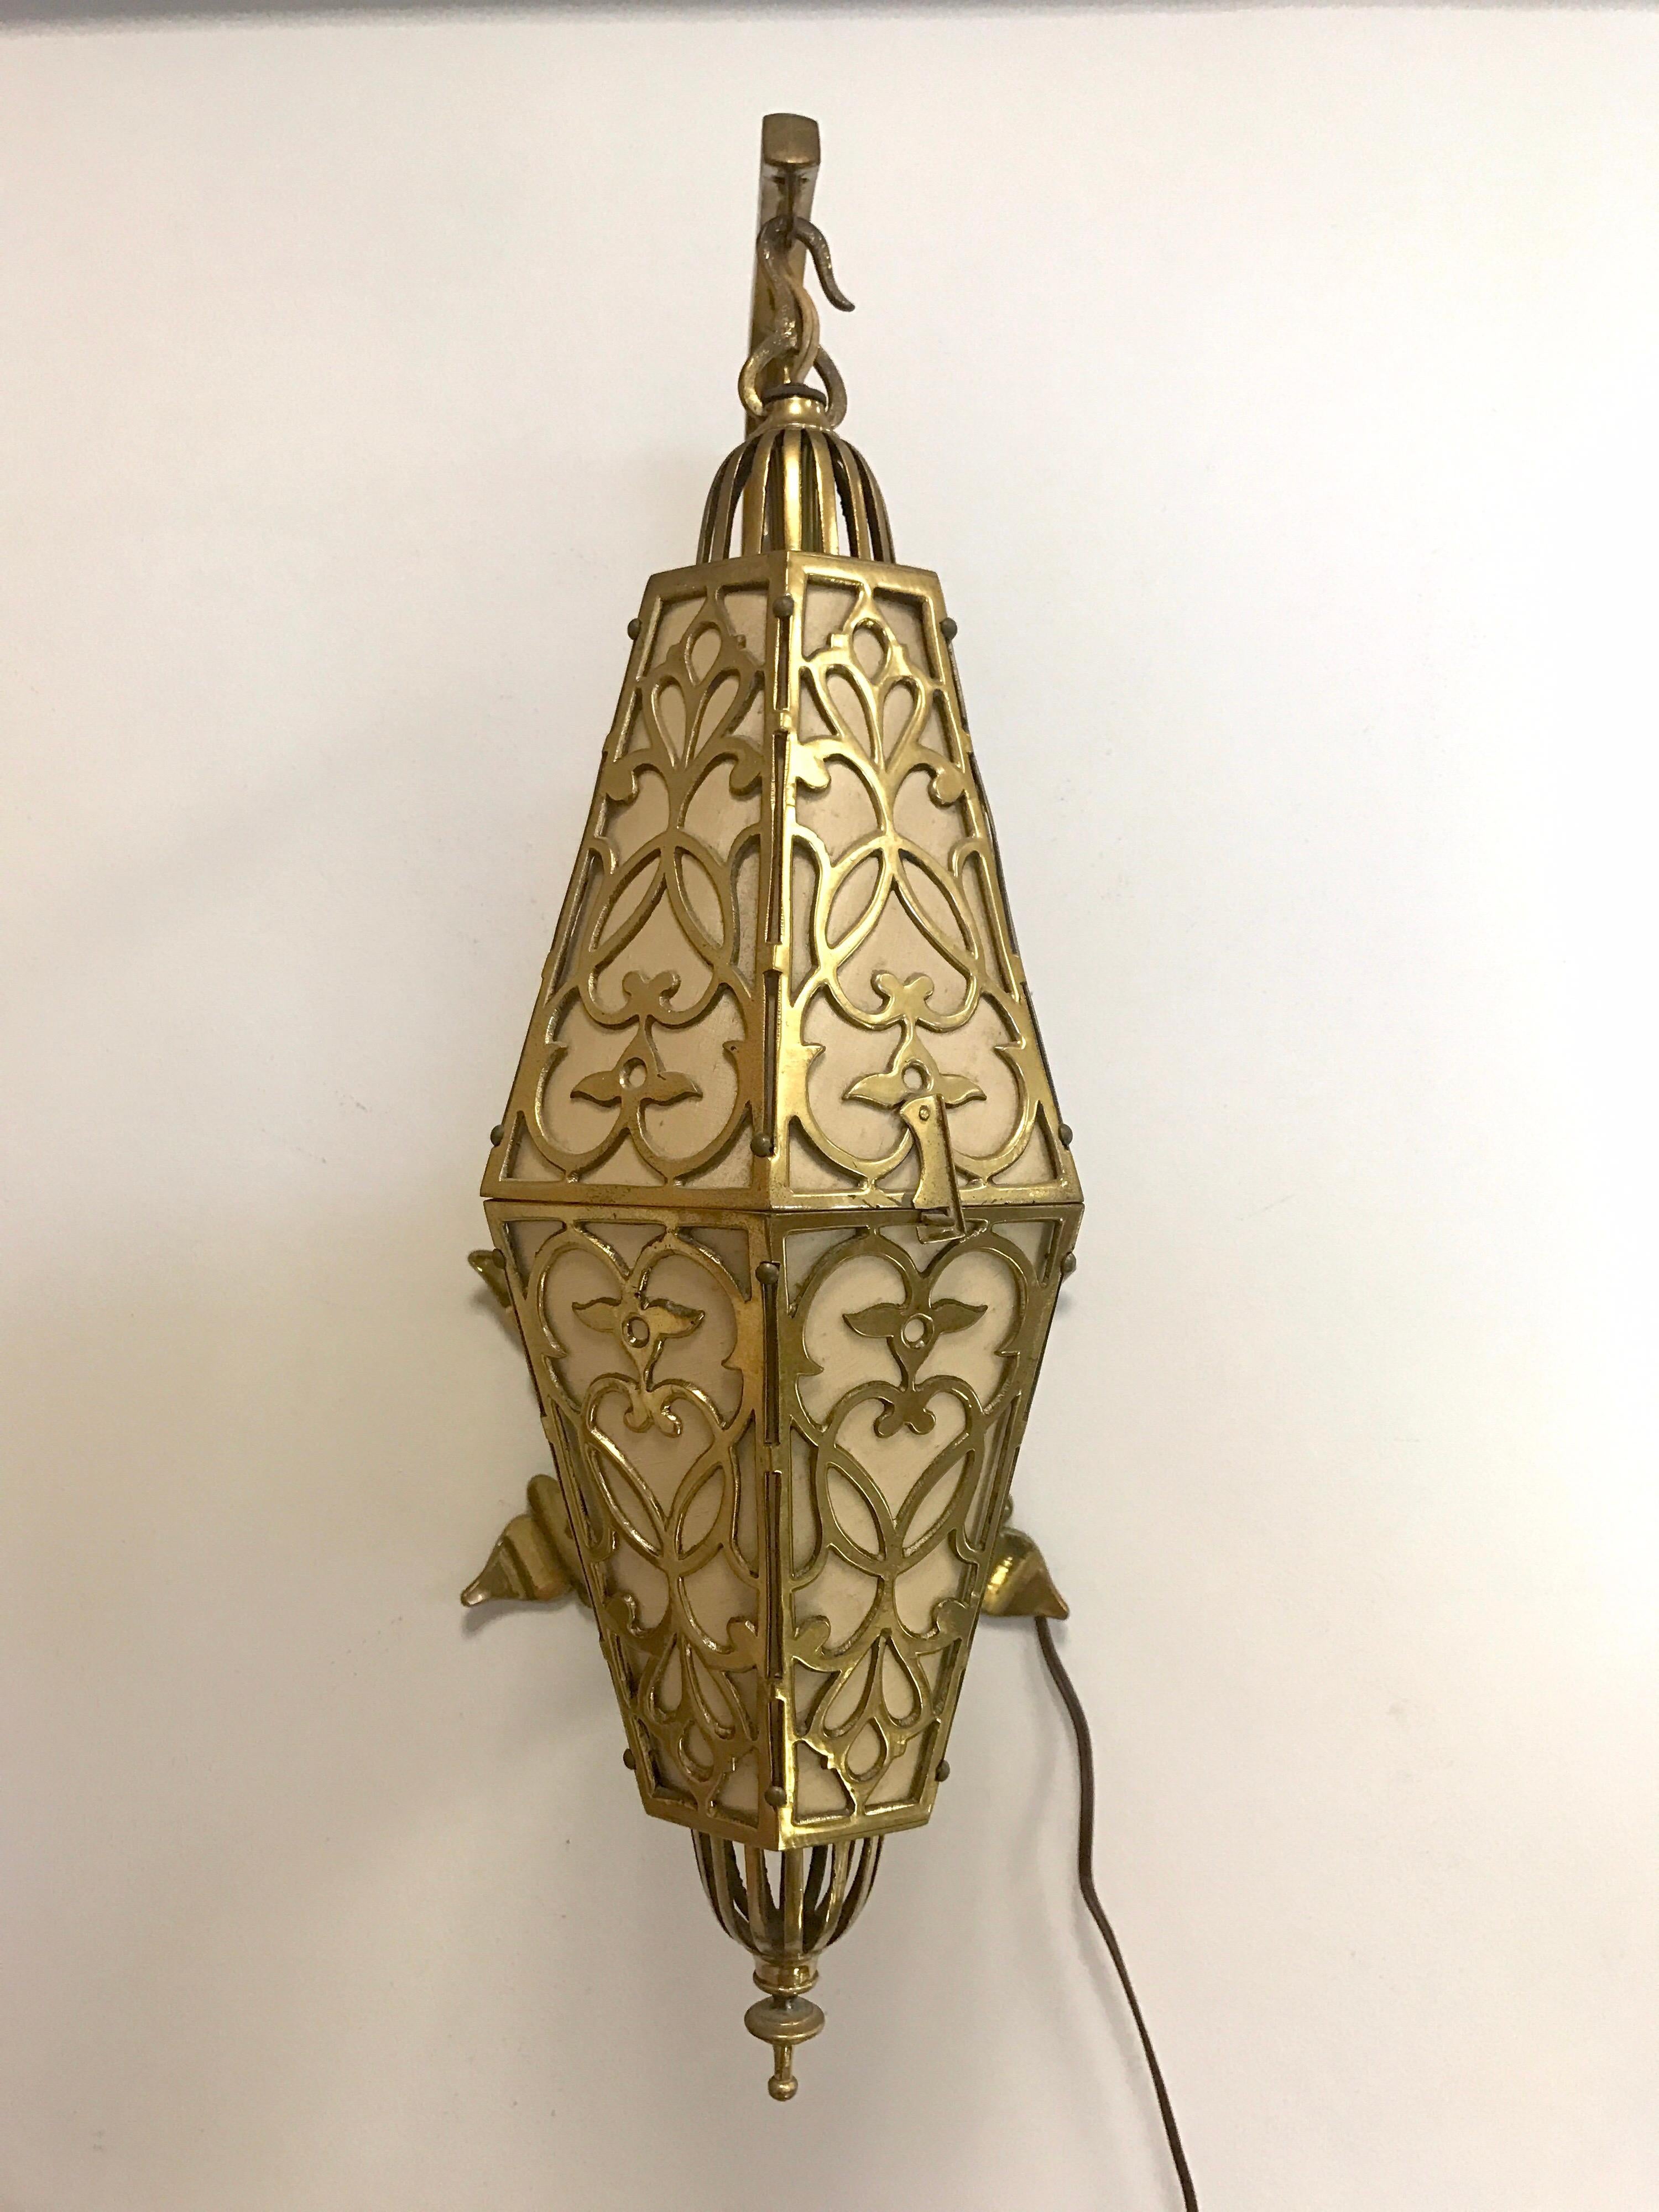 One of a kind French Art Deco sconces that open up, see pictures. Latticed brass throughout and nothing short of spectacular.